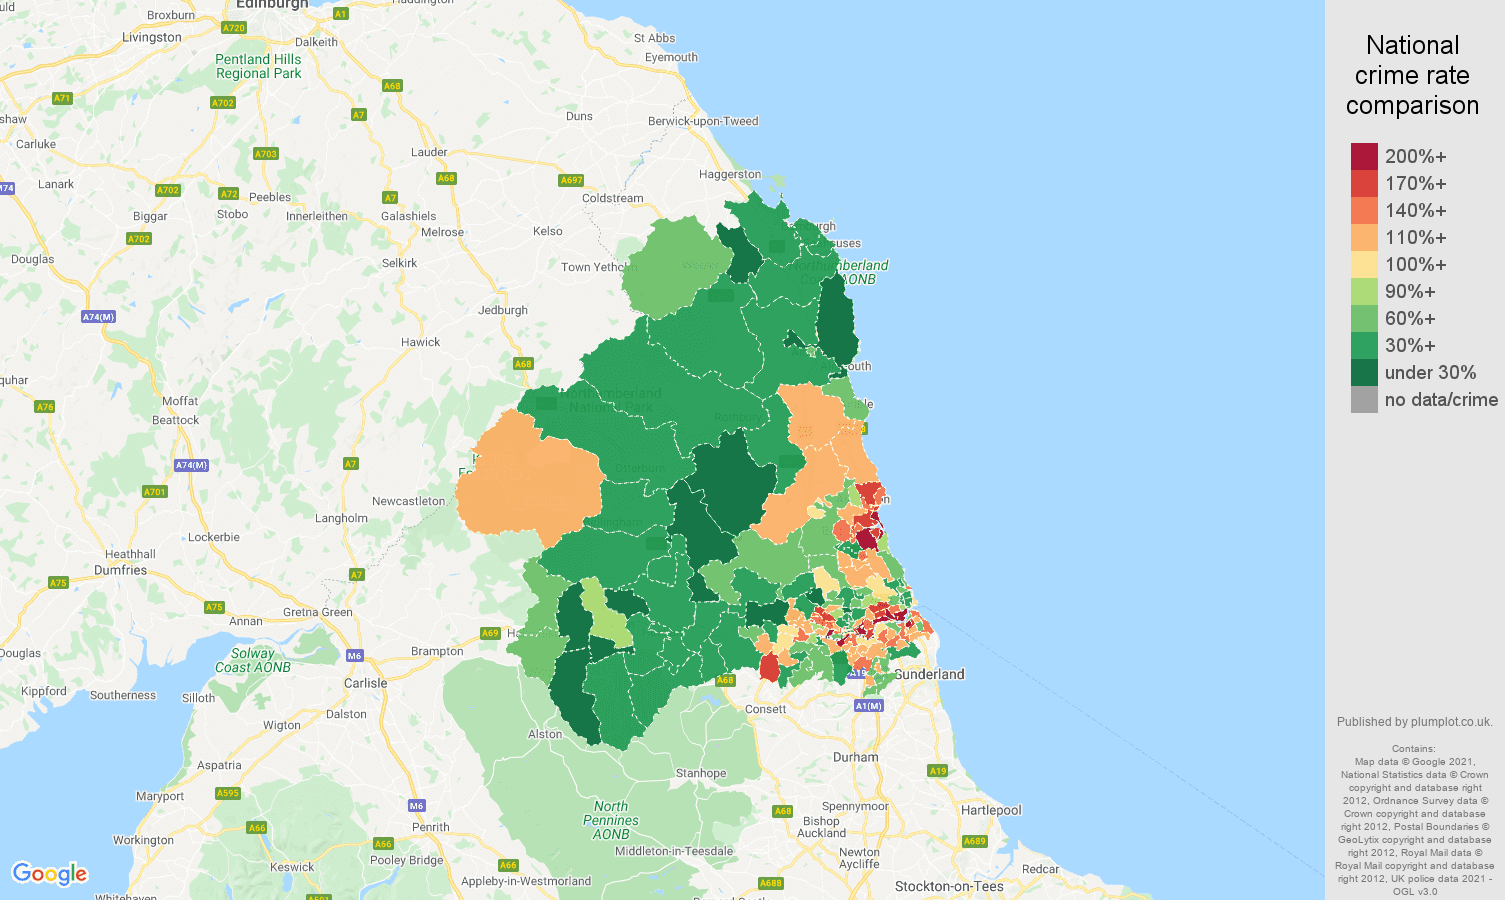 Newcastle upon Tyne violent crime rate comparison map